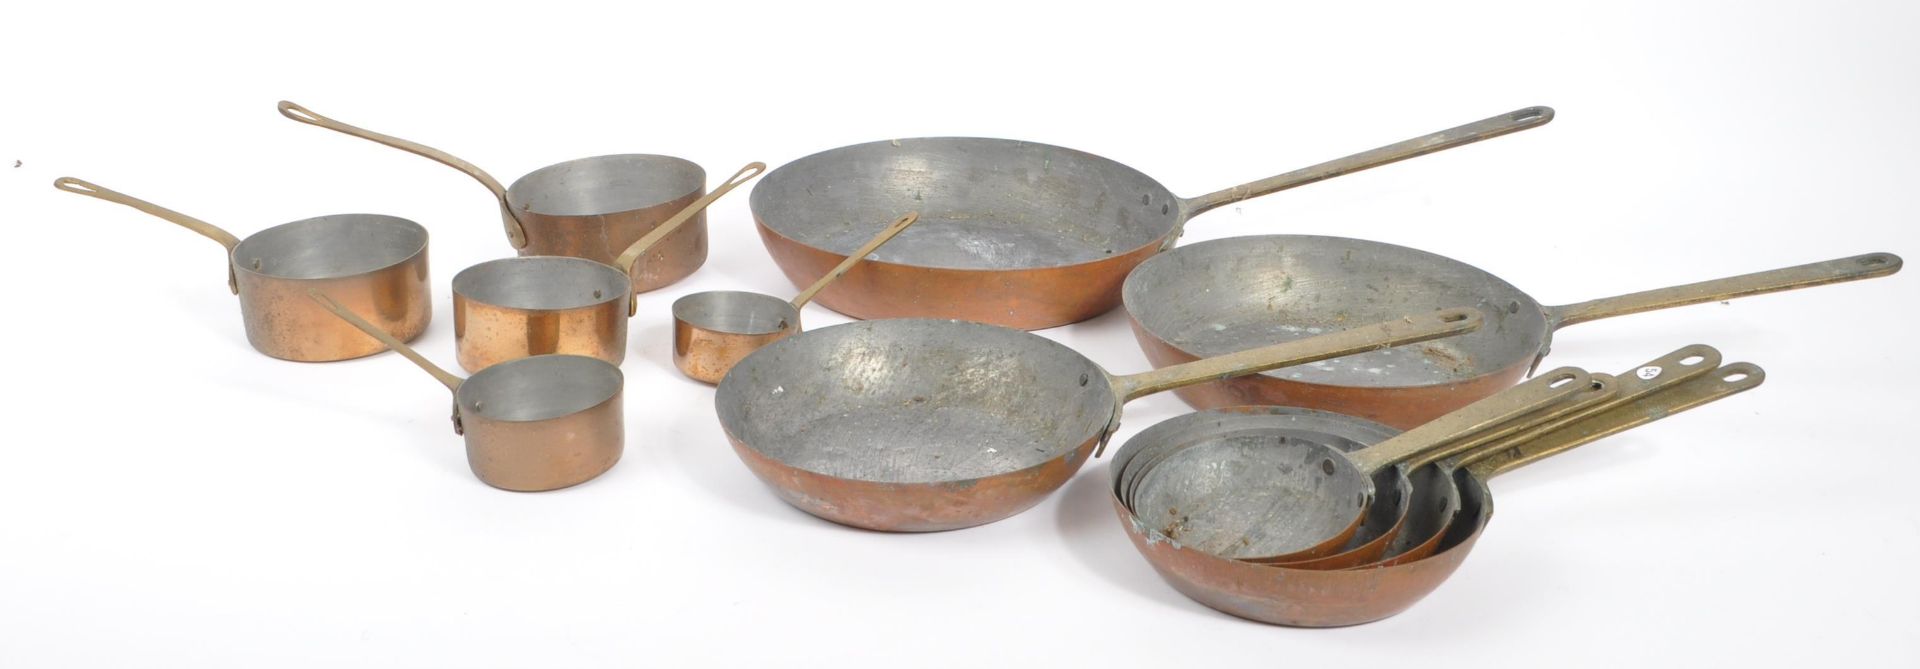 COLLECTION OF 19TH CENTURY VICTORIAN COPPER FRYING PANS